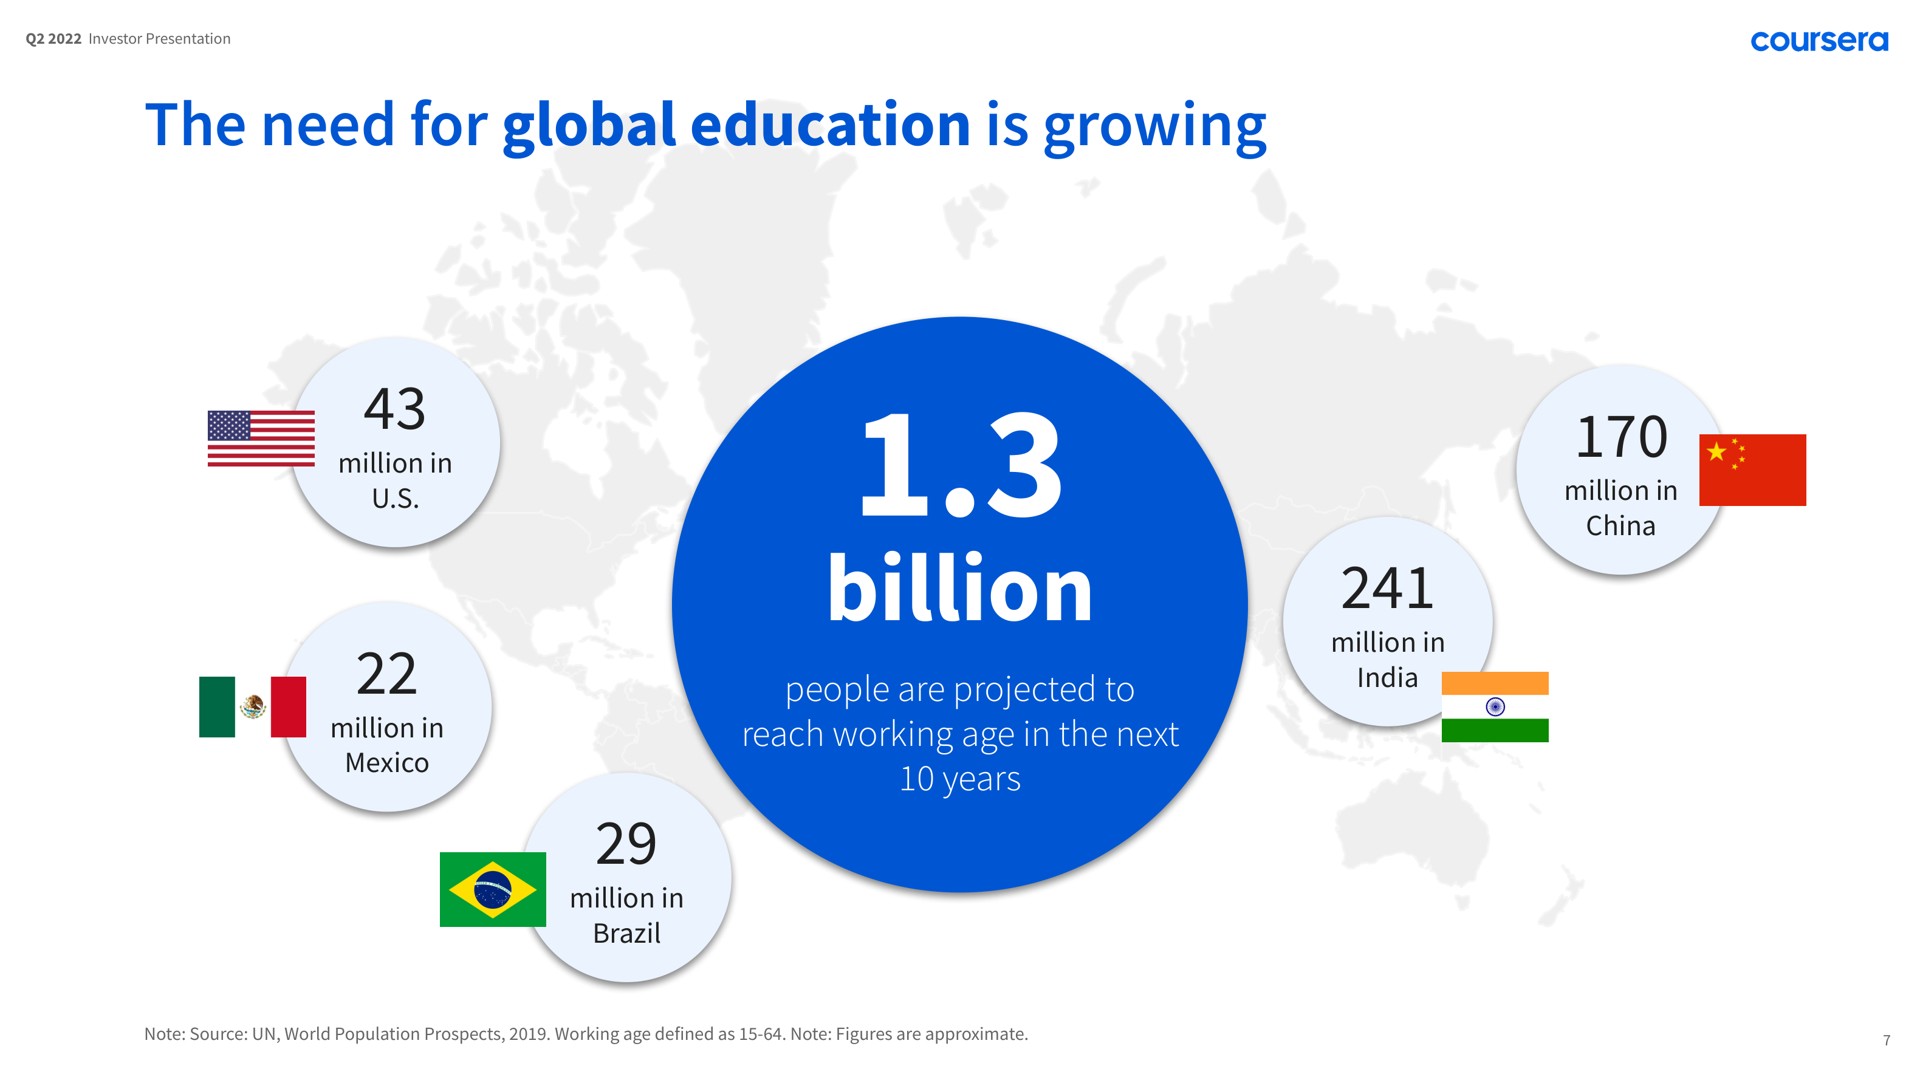 the need for global education is growing a i million in billion people are projected to reach working age in the next | Coursera